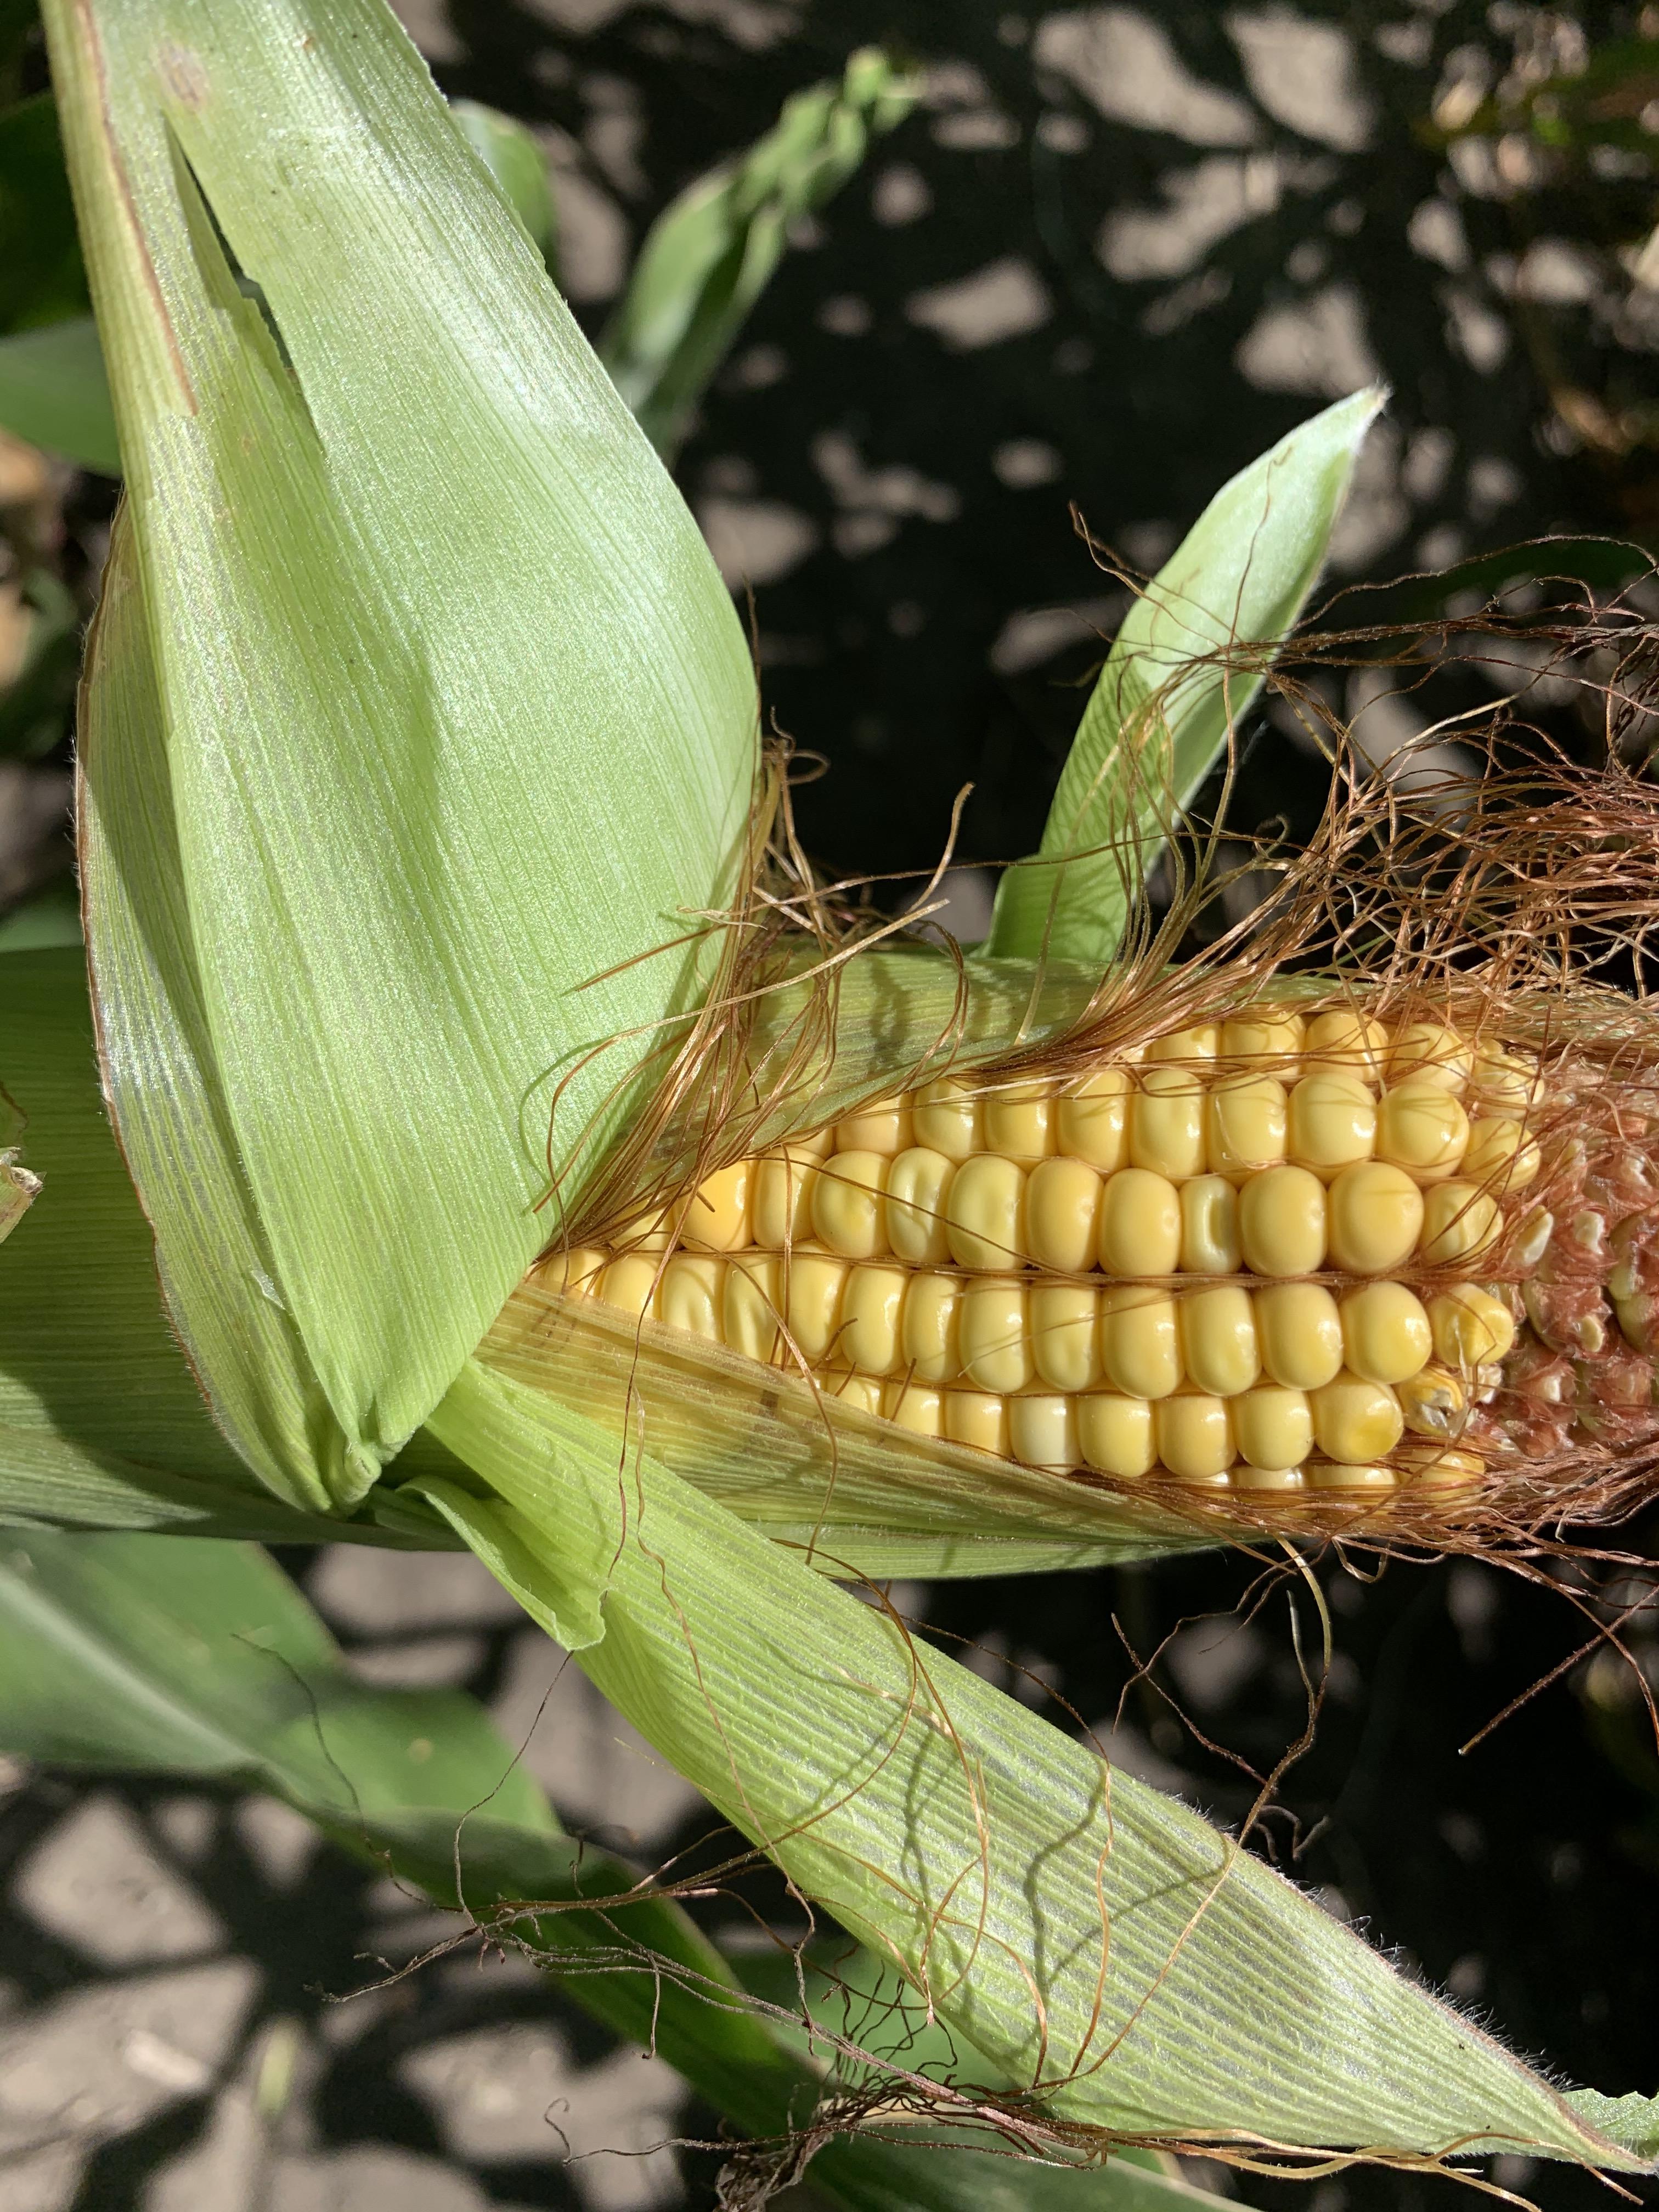 The impact of nitrogen fertilizer rates on corn is one of the topics for the Carrington Research Extension Center's virtual row crop program. (NDSU photo)